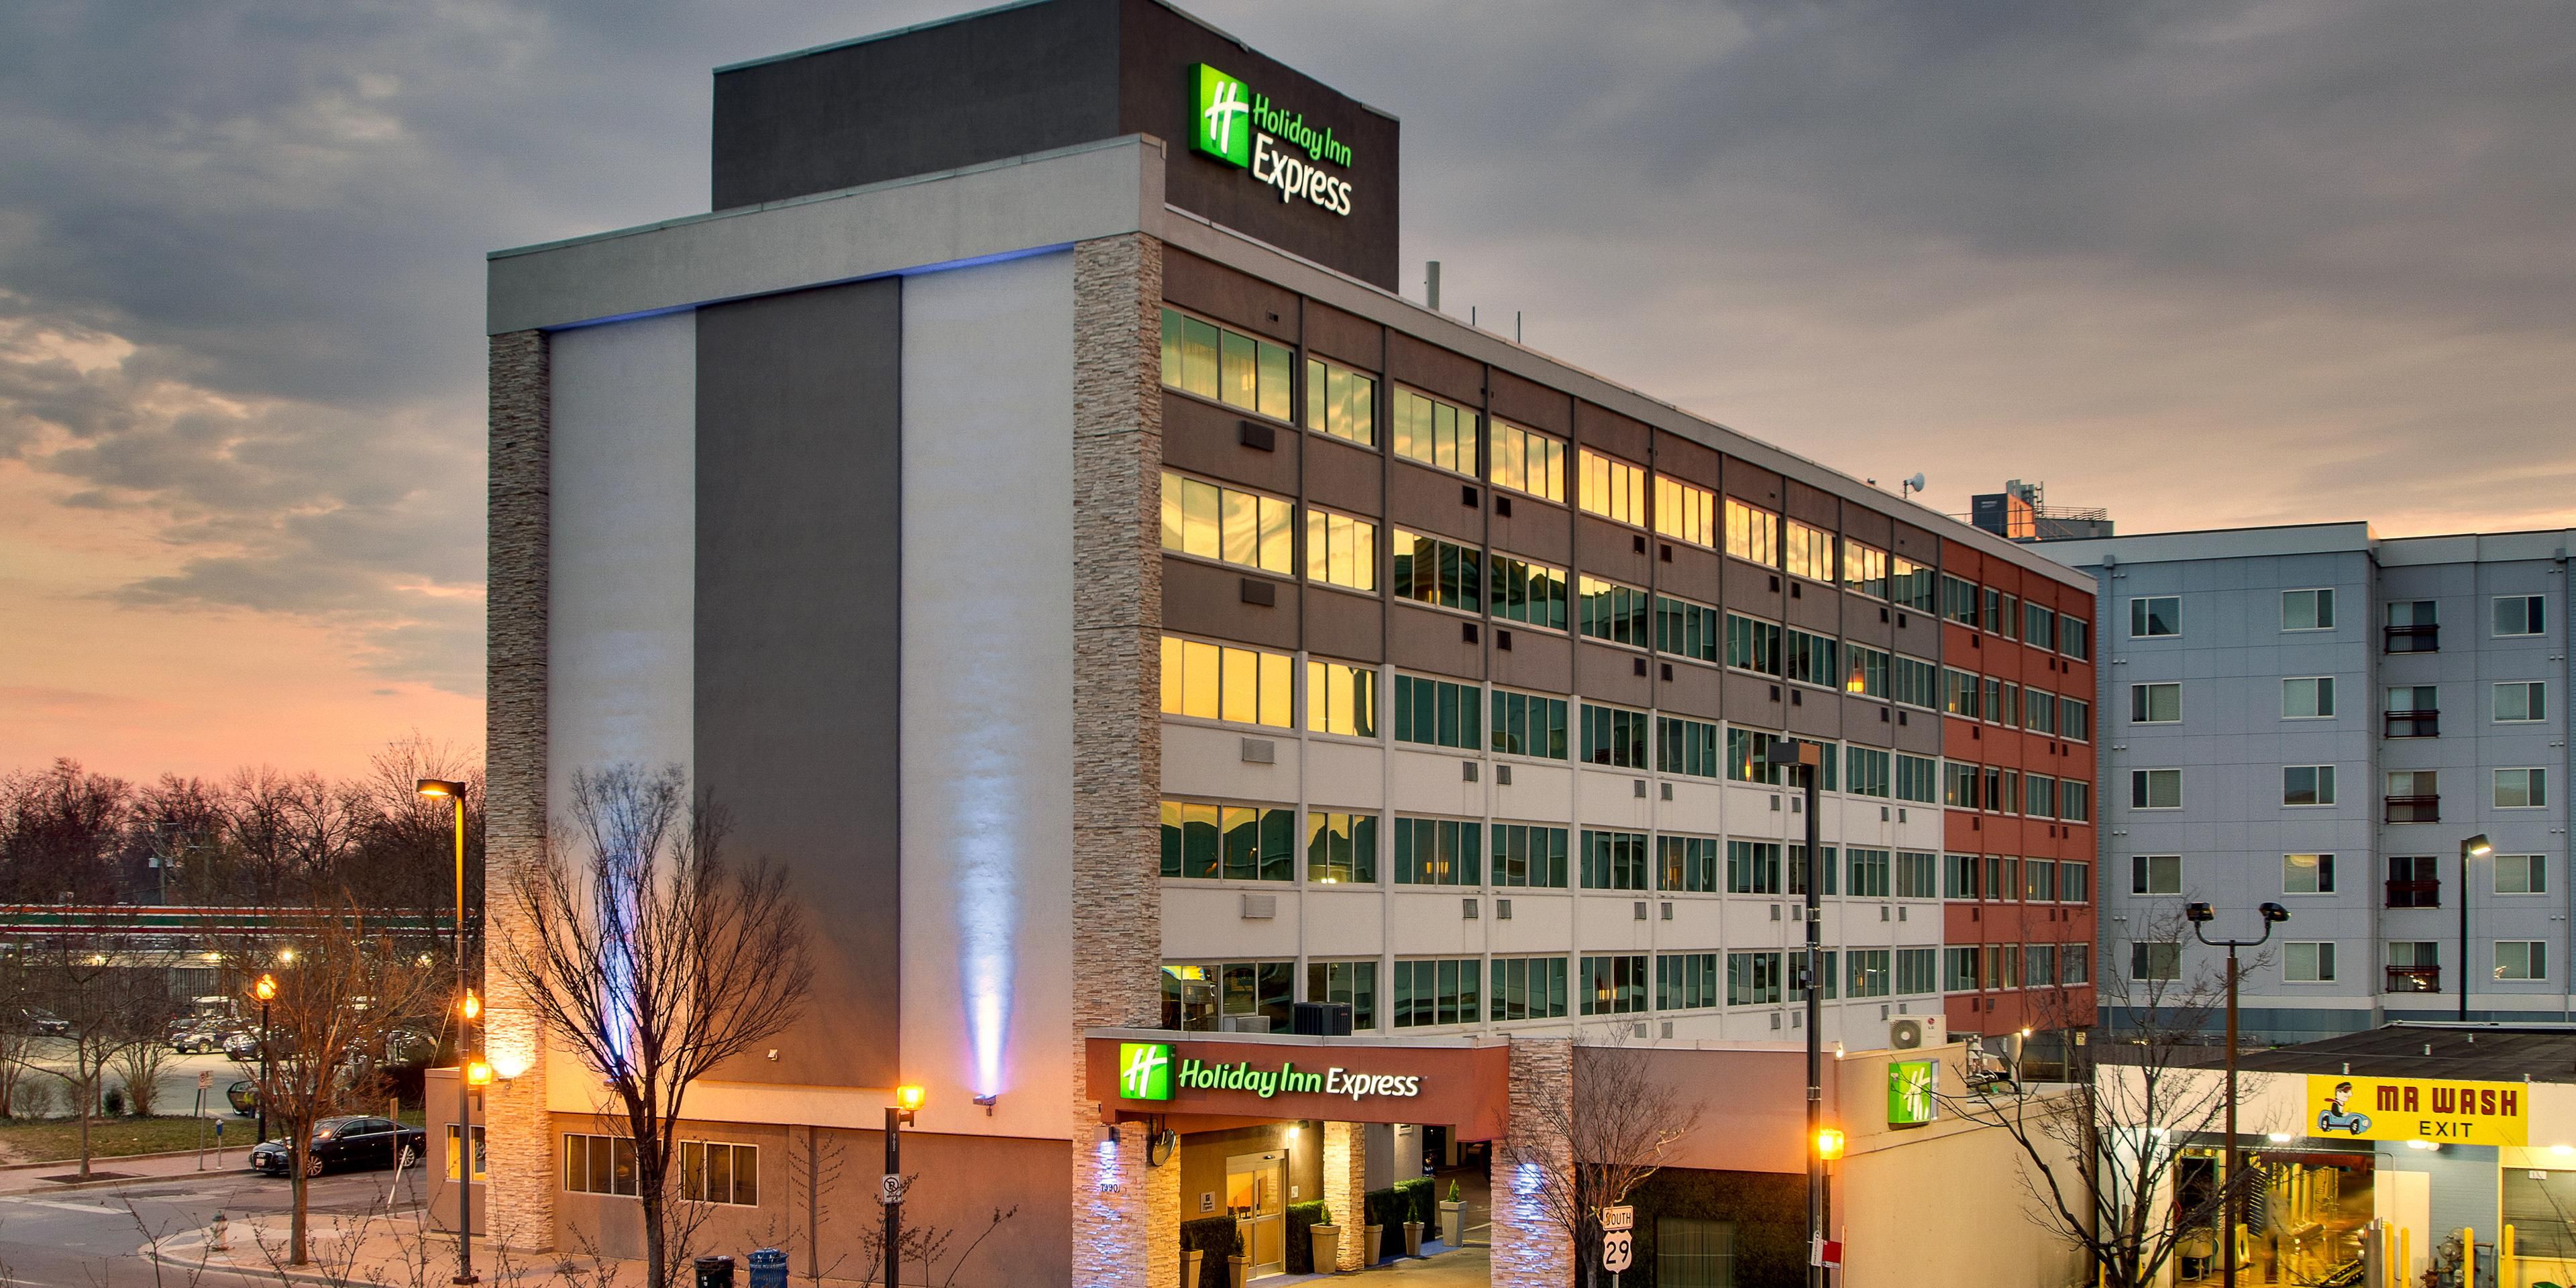 Our hotel is located right outside of Washington, D.C., and in the heart of downtown Silver Spring. Enjoy convenient access to D.C.'s top attractions including White House, Embassy Row, Smithsonian Institution, National Zoo, and much more. Additionally, we are within walking distance from the Silver Spring Metro Station. 